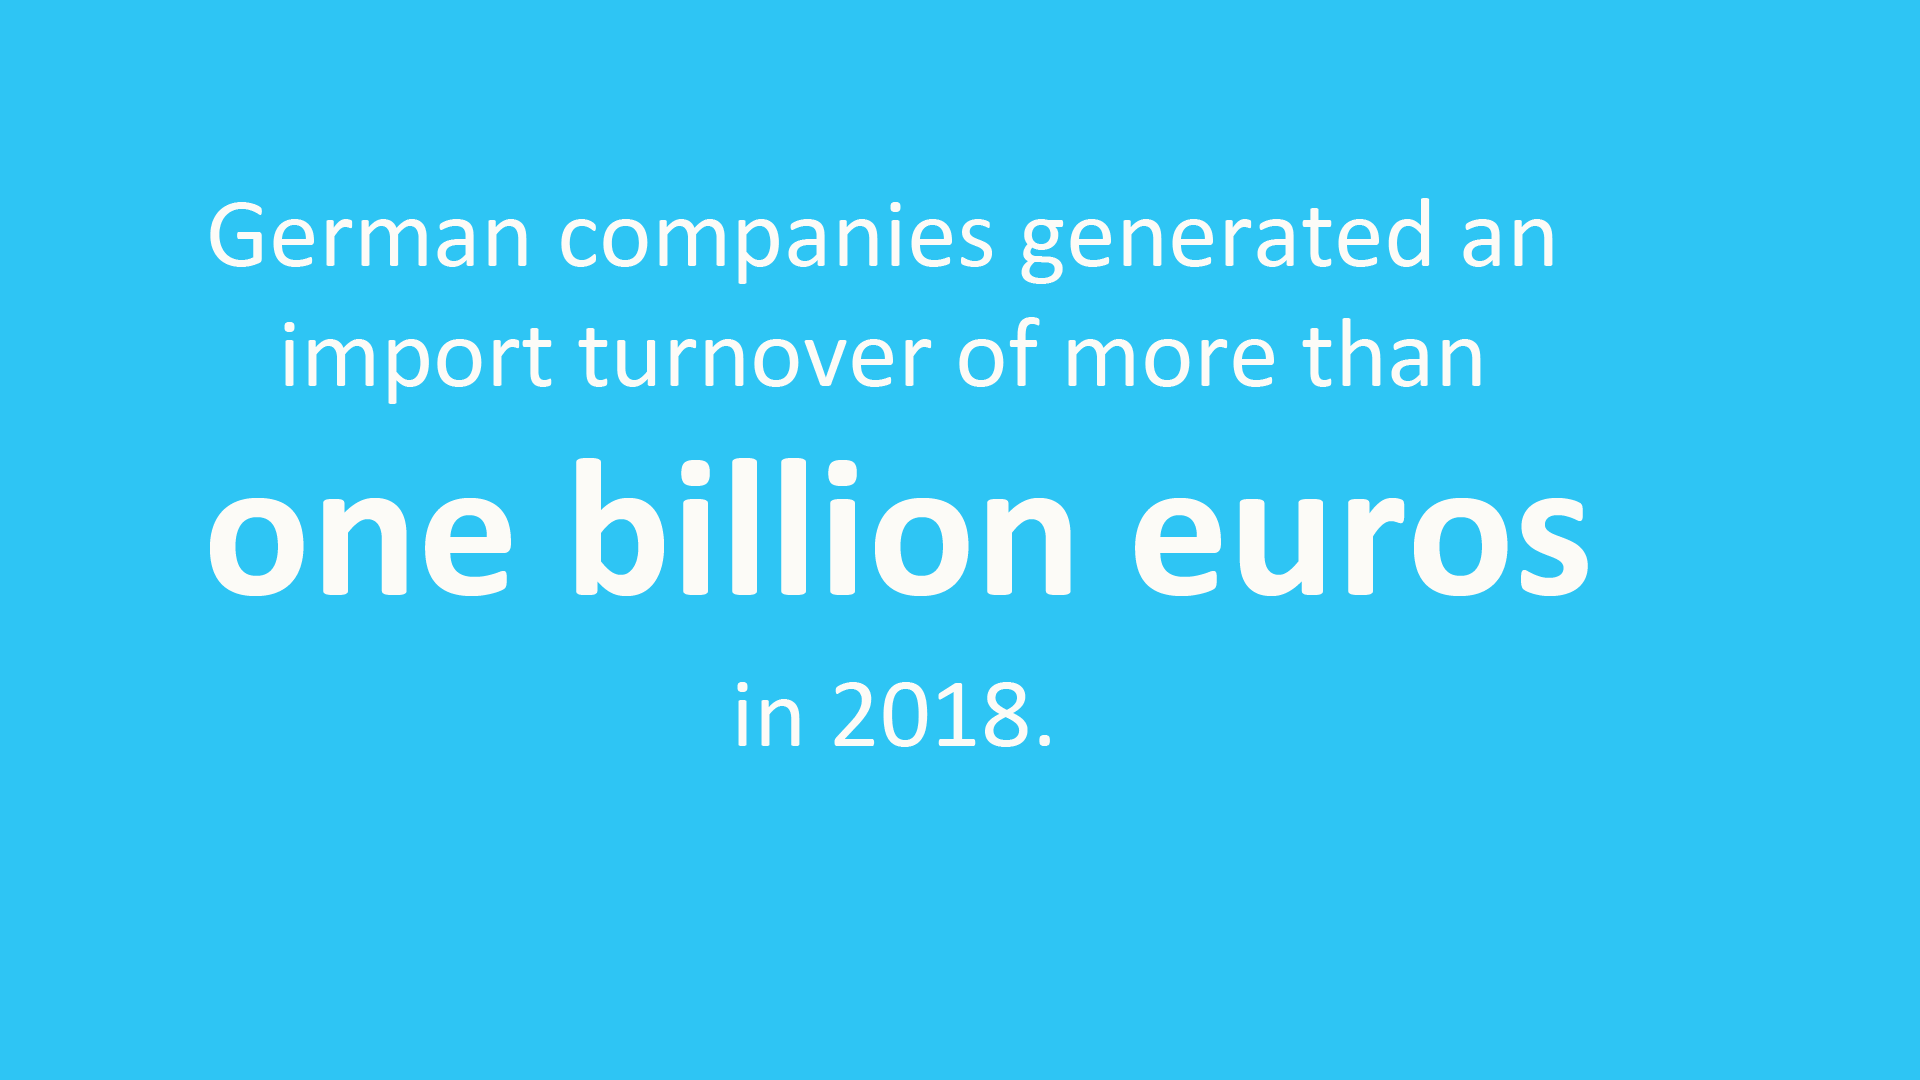 German companies generated an import turnover of more than one billion euros in 2018.